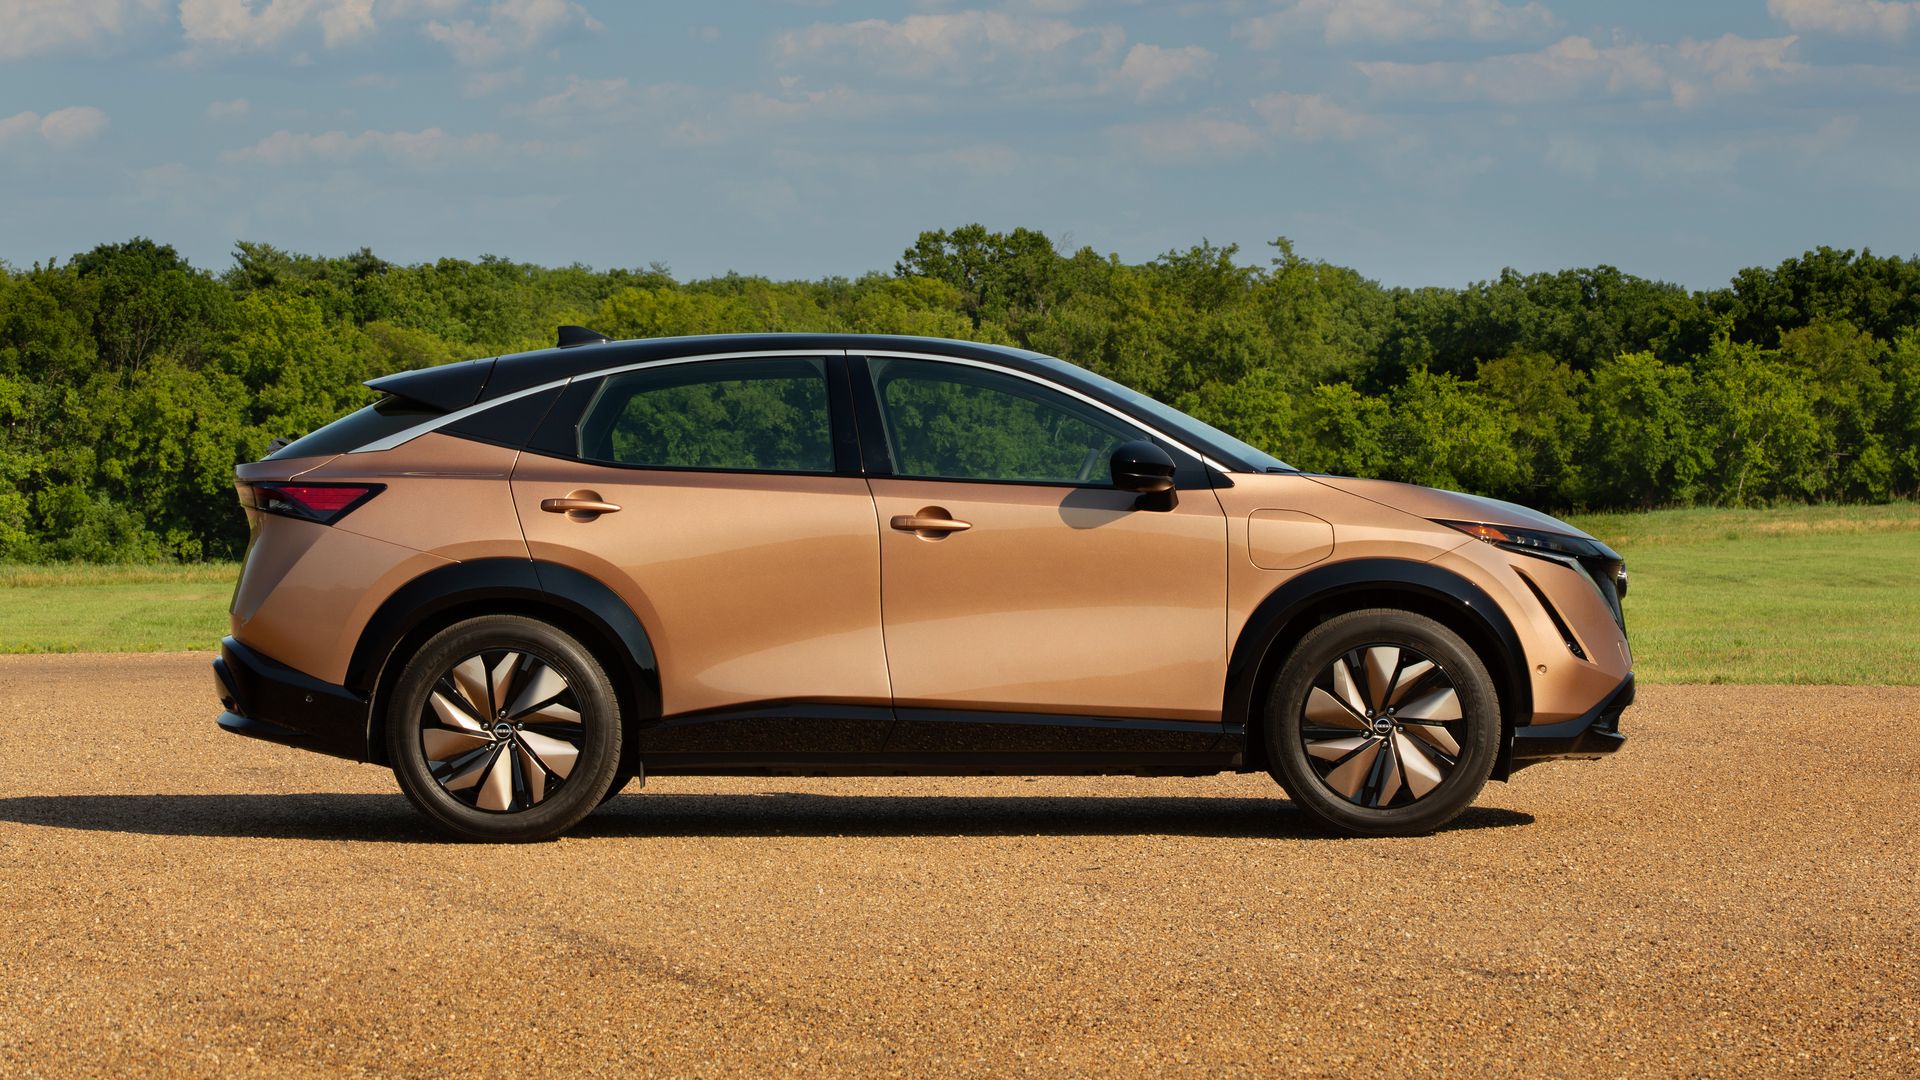 Image of a copper-colored Nissan Ariya electric crossover, going on sale in December 2022